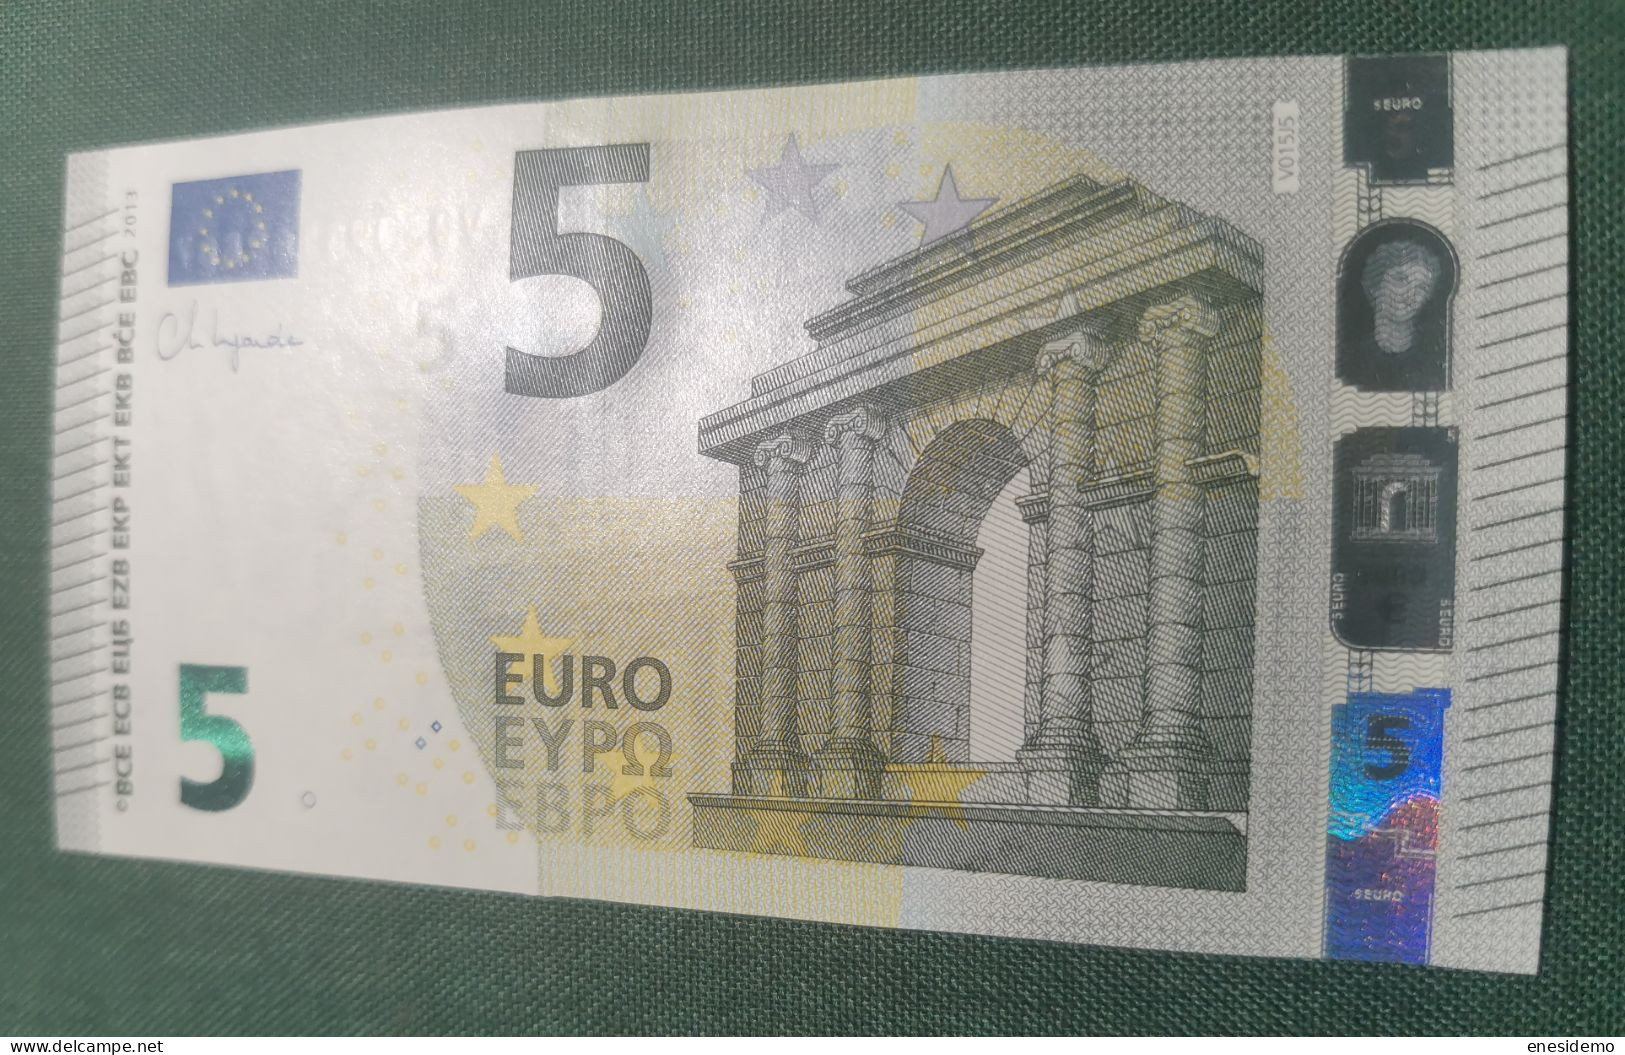 5 EURO SPAIN 2013 LAGARDE V015J5 VC SC FDS UNCIRCULATED PERFECT - 5 Euro